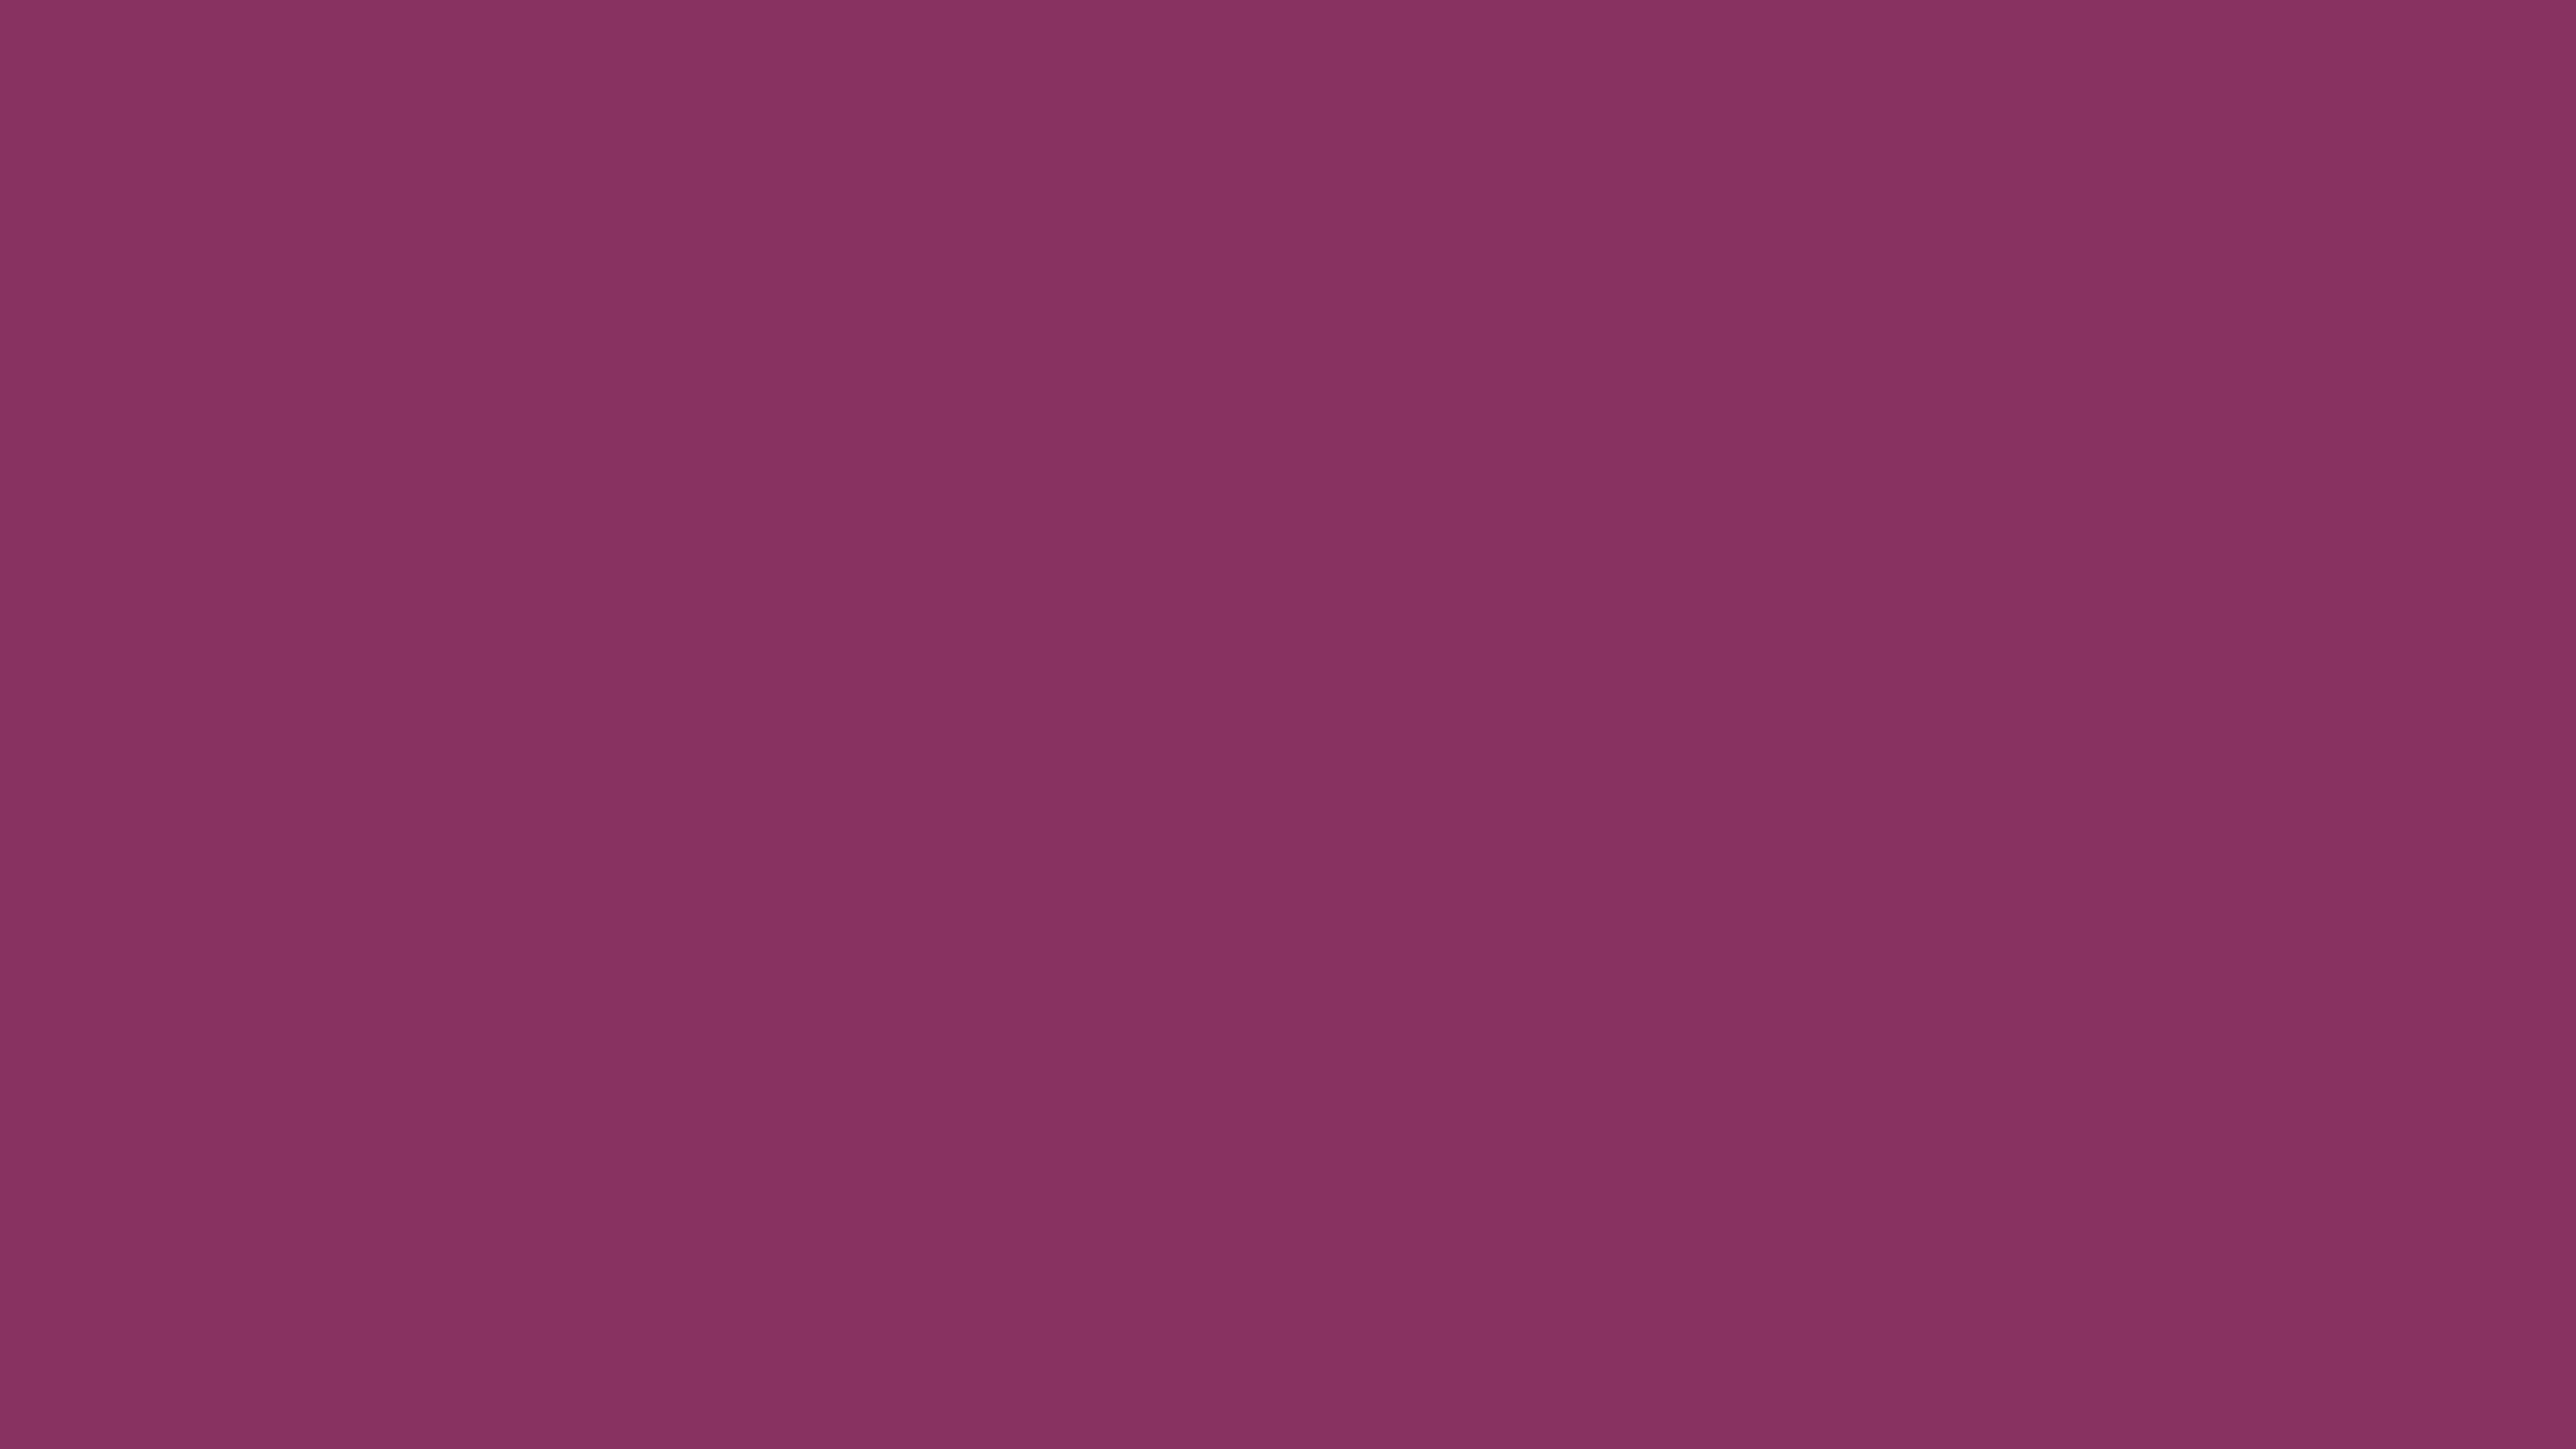 3840x2160 Boysenberry Solid Color Background